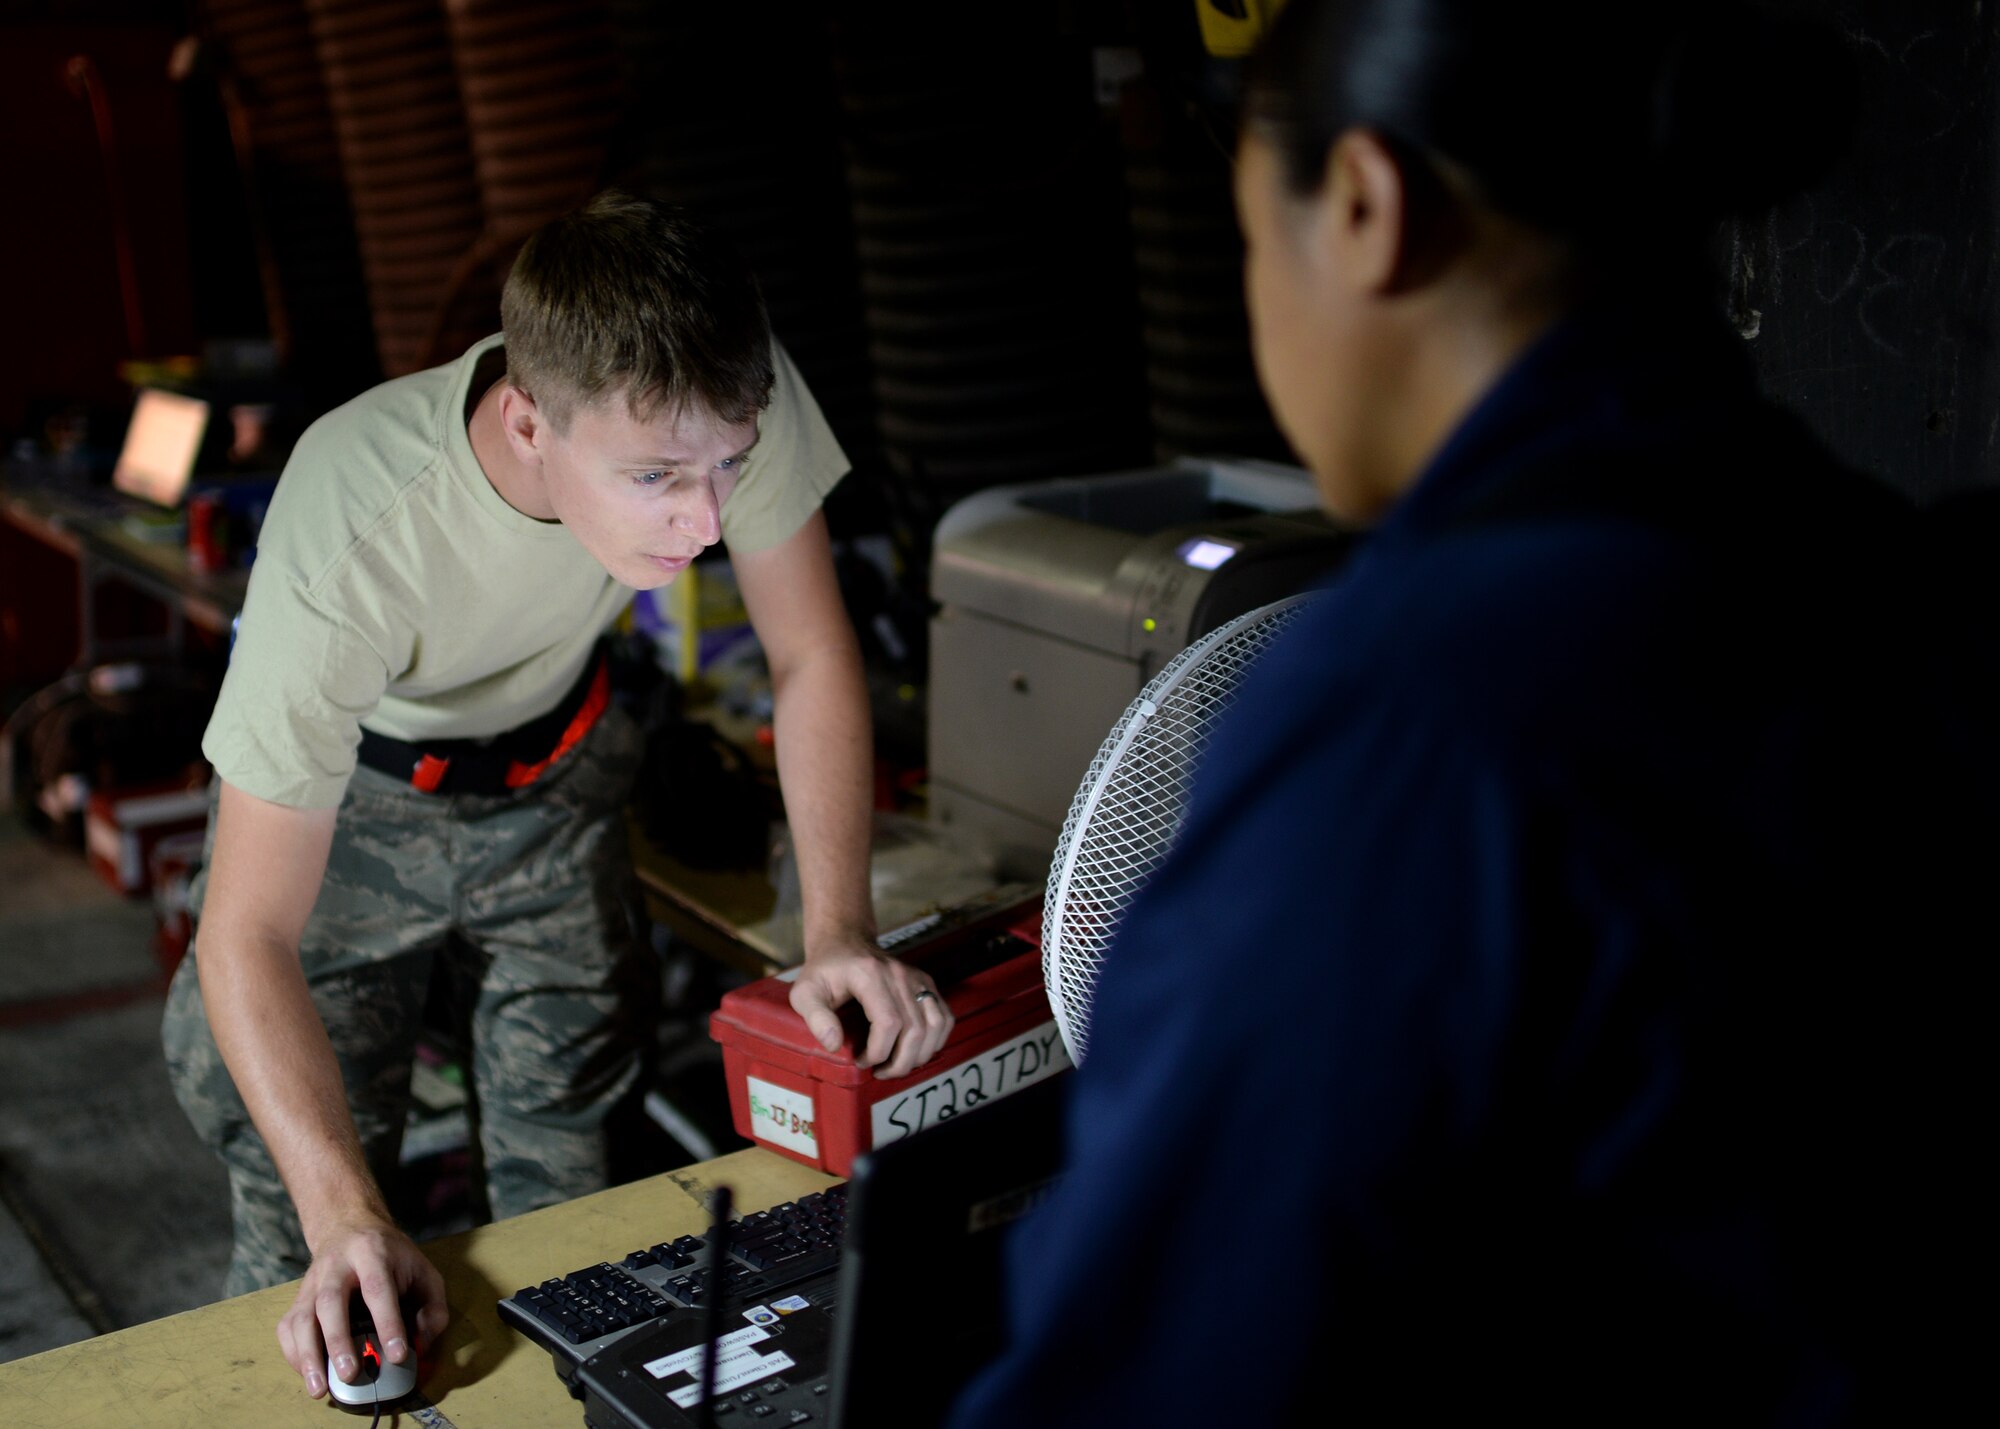 U.S. Air Force Senior Airman Coleman Haynes, 52nd Aircraft Maintenance Squadron support technician and native of Nevis, Minn., checks out equipment to U.S. Air Force Staff Sgt. Dionne Williams, 52nd AMXS 480th Aircraft Maintenance Unit jet engine technician and native of Honolulu, Hawaii, at the squadron's supply area in Souda Bay, Greece, Aug. 20, 2014. The launch expectation during the bilateral training between the Hellenic and U.S. air forces is 22 sorties a day, which then requires the constant work of maintenance technicians to sustain aircraft readiness to meet the mission needs. (U.S. Air Force photo by Staff Sgt. Daryl Knee/Released)